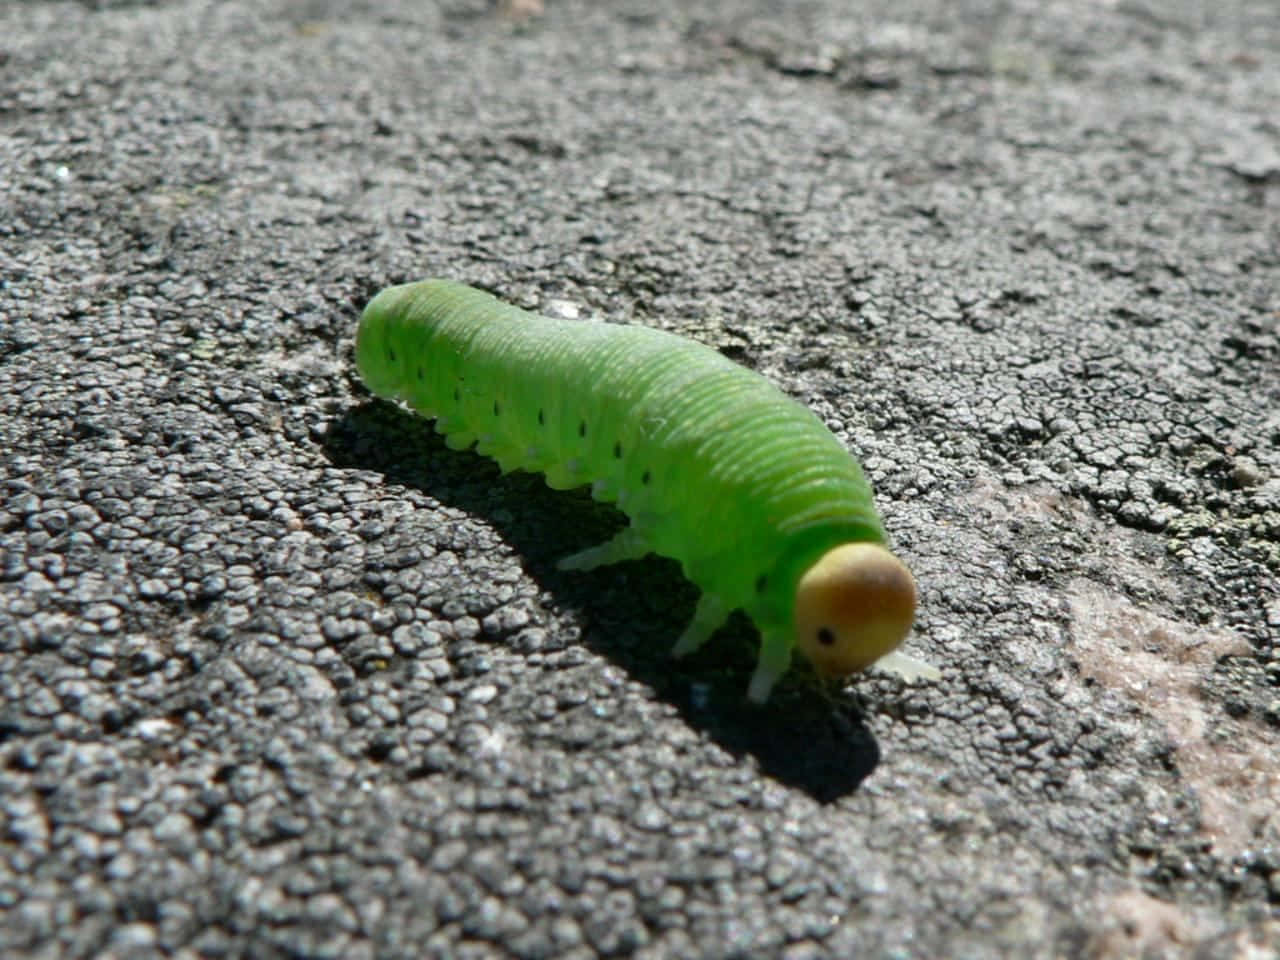 A bright, colorful caterpillar meant to represent the beauty of the insect world.